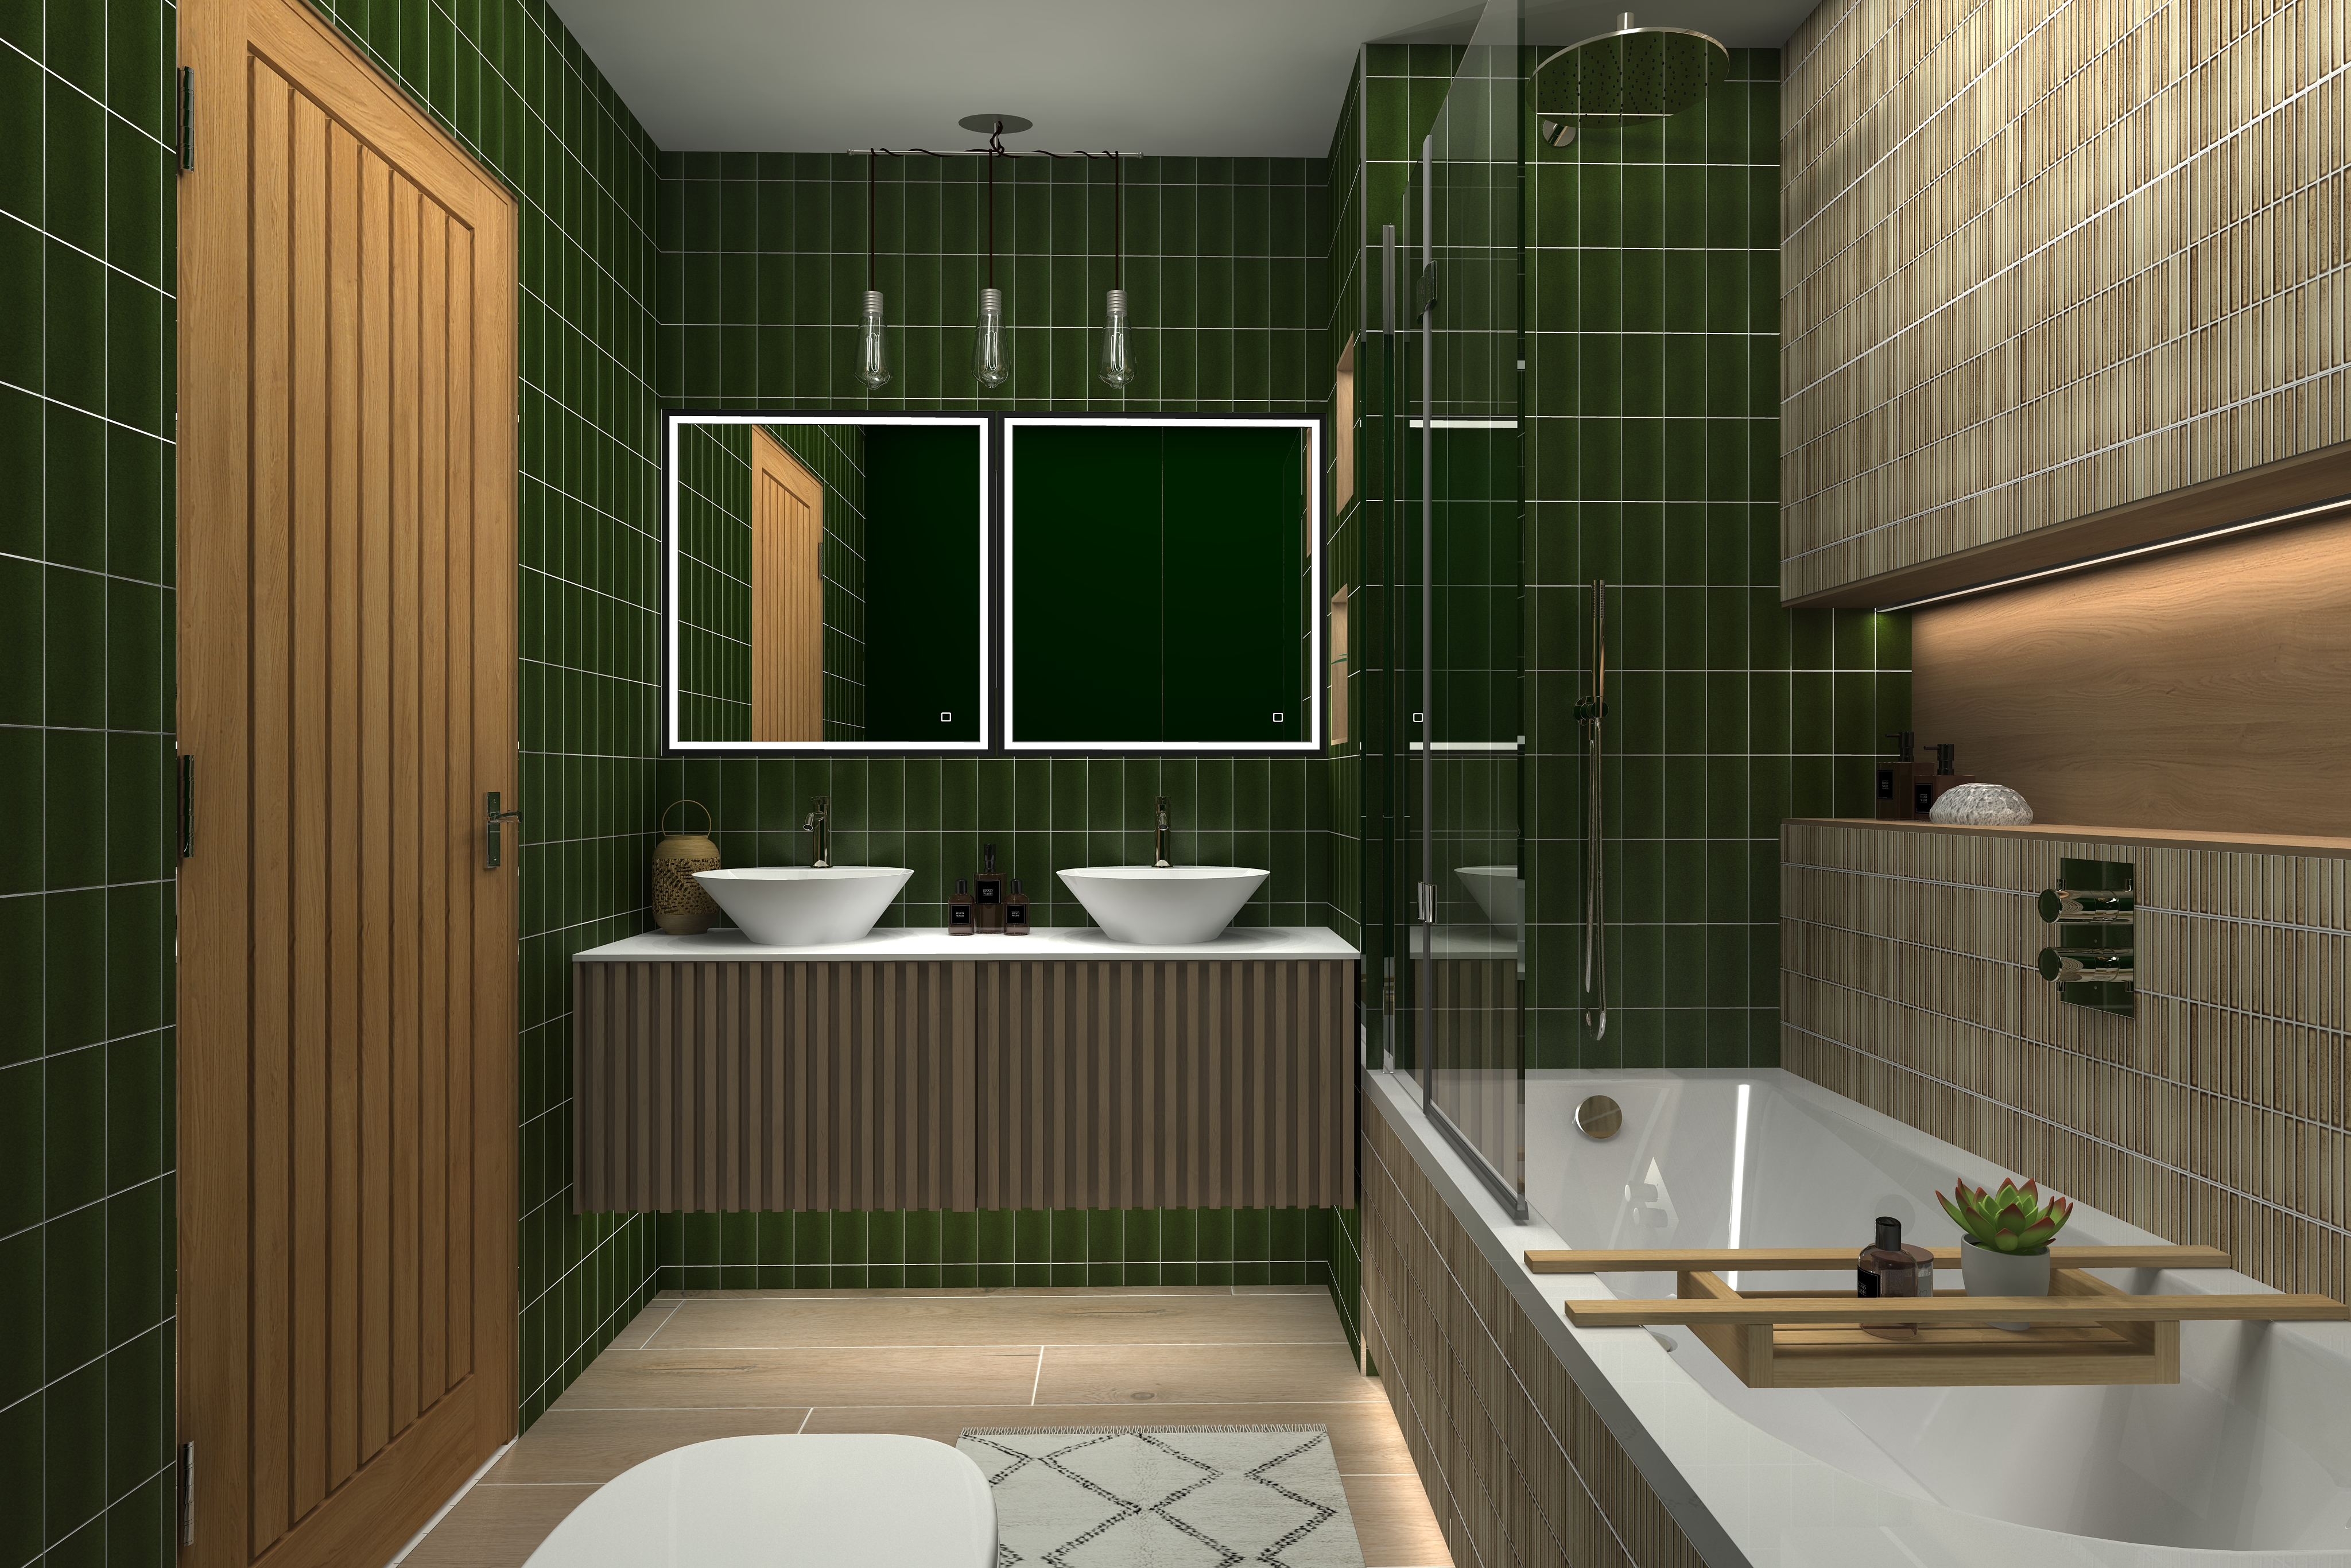 Digital lifestyle image of the Capricorn inspired bathroom, with wooden bath tidy holding succulent and bath products, integrated shower shelf, chrome bath filler and dials, slotted wooden wall mounted vanity unit, twin countertop basins with tall chrome basin taps, twin recessed LED mirror cabinets and a trio of overside celing hung lightbulbs